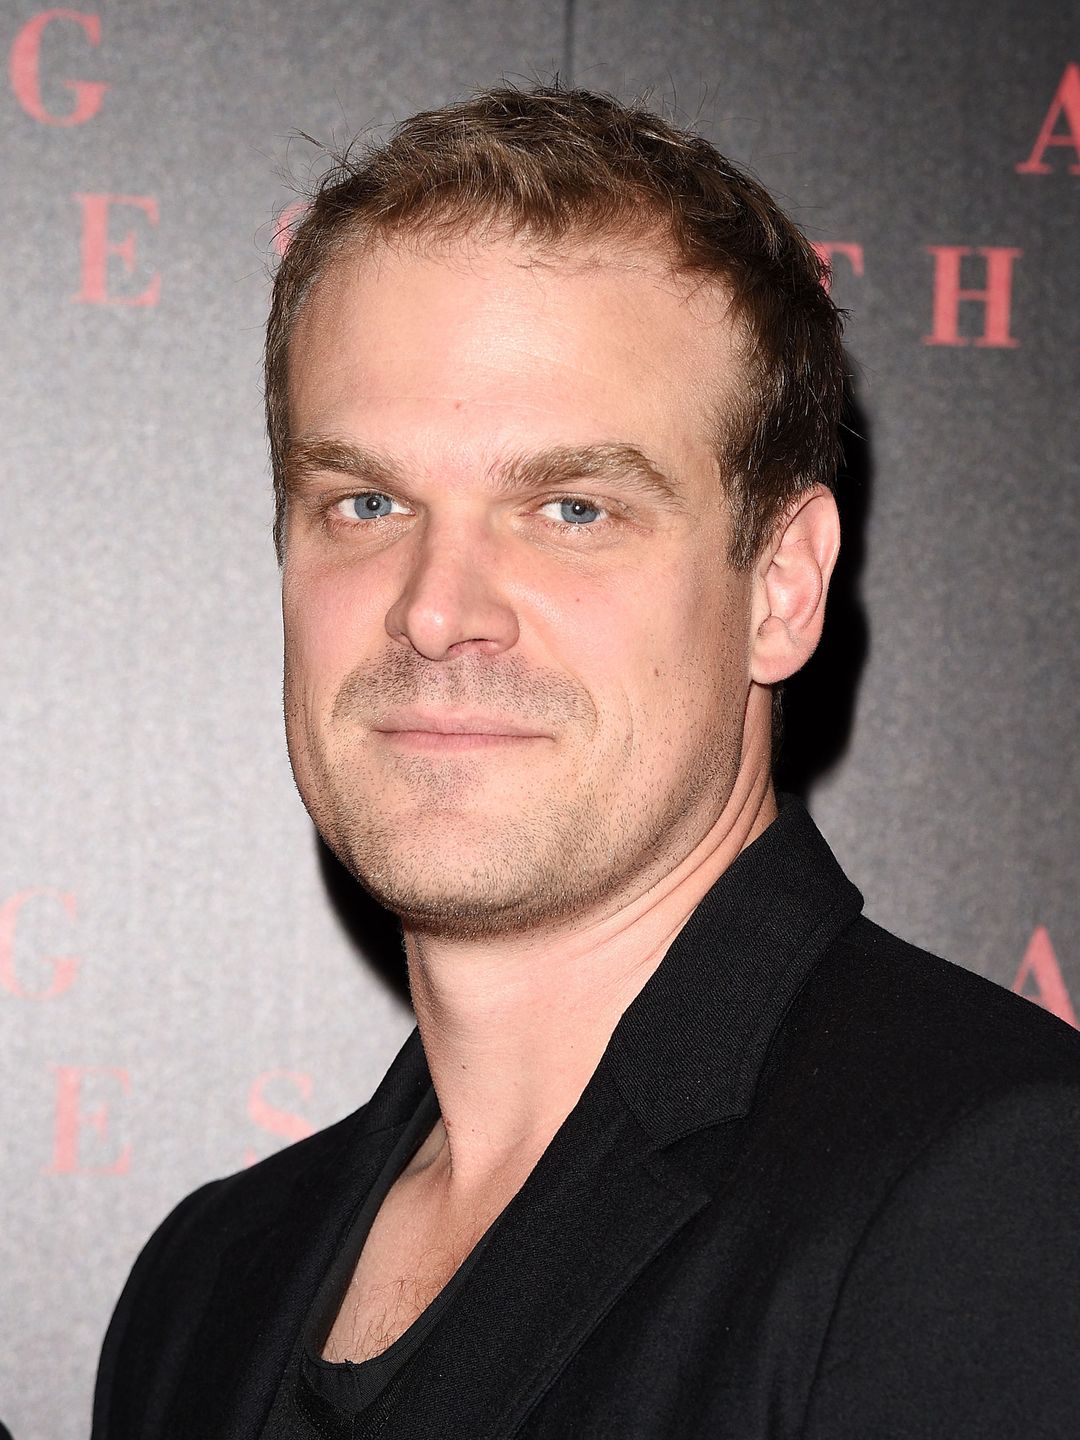 David Harbour who is his mother